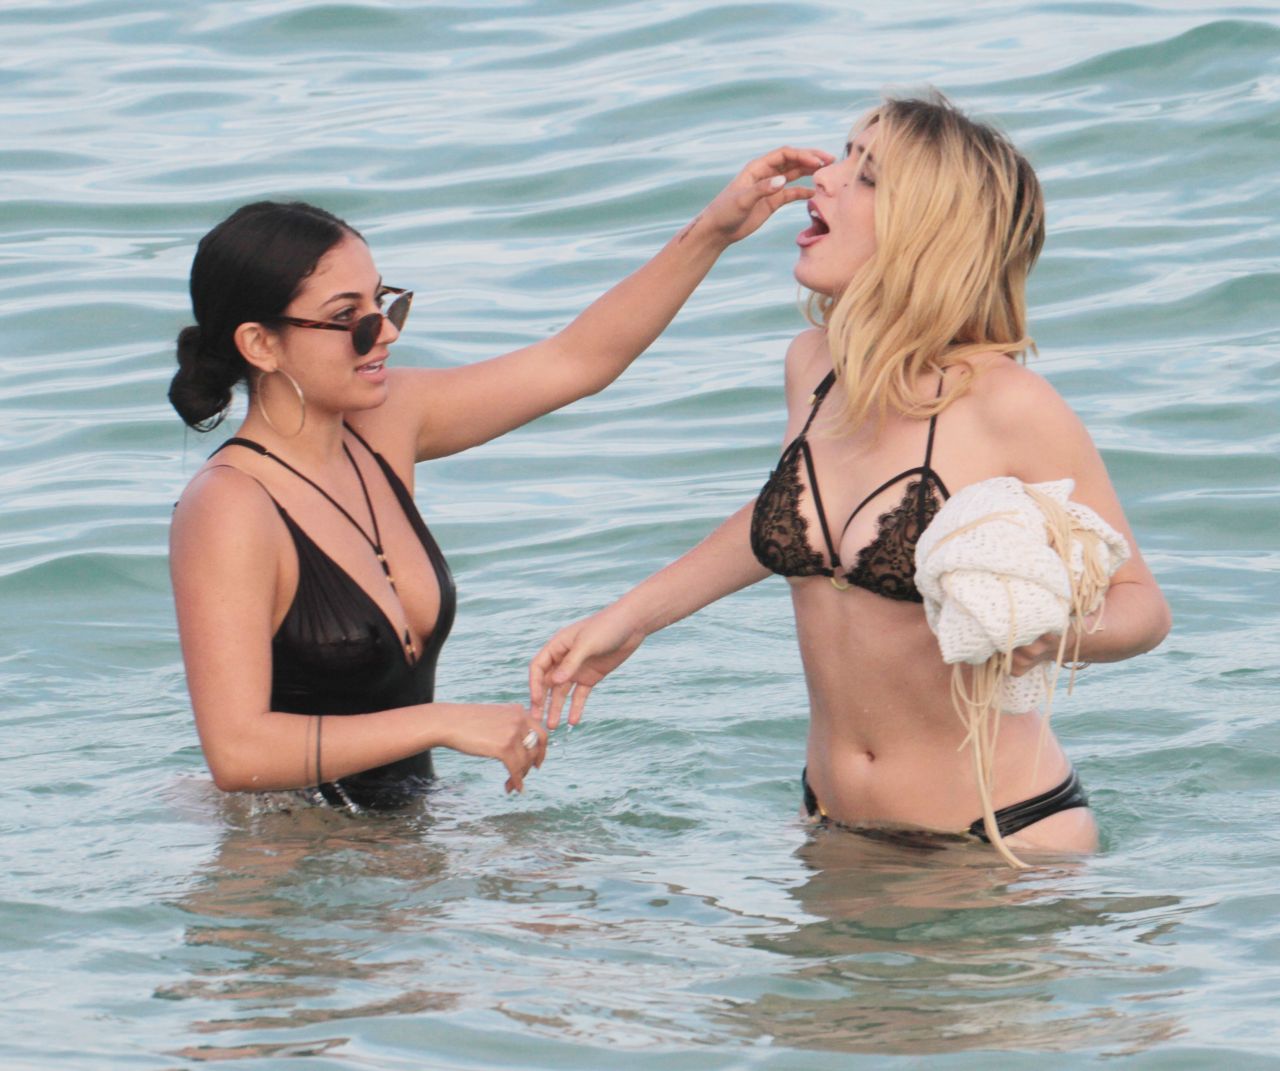 lele-pons-and-inanna-on-the-beach-in-miami-beach-7.jpg